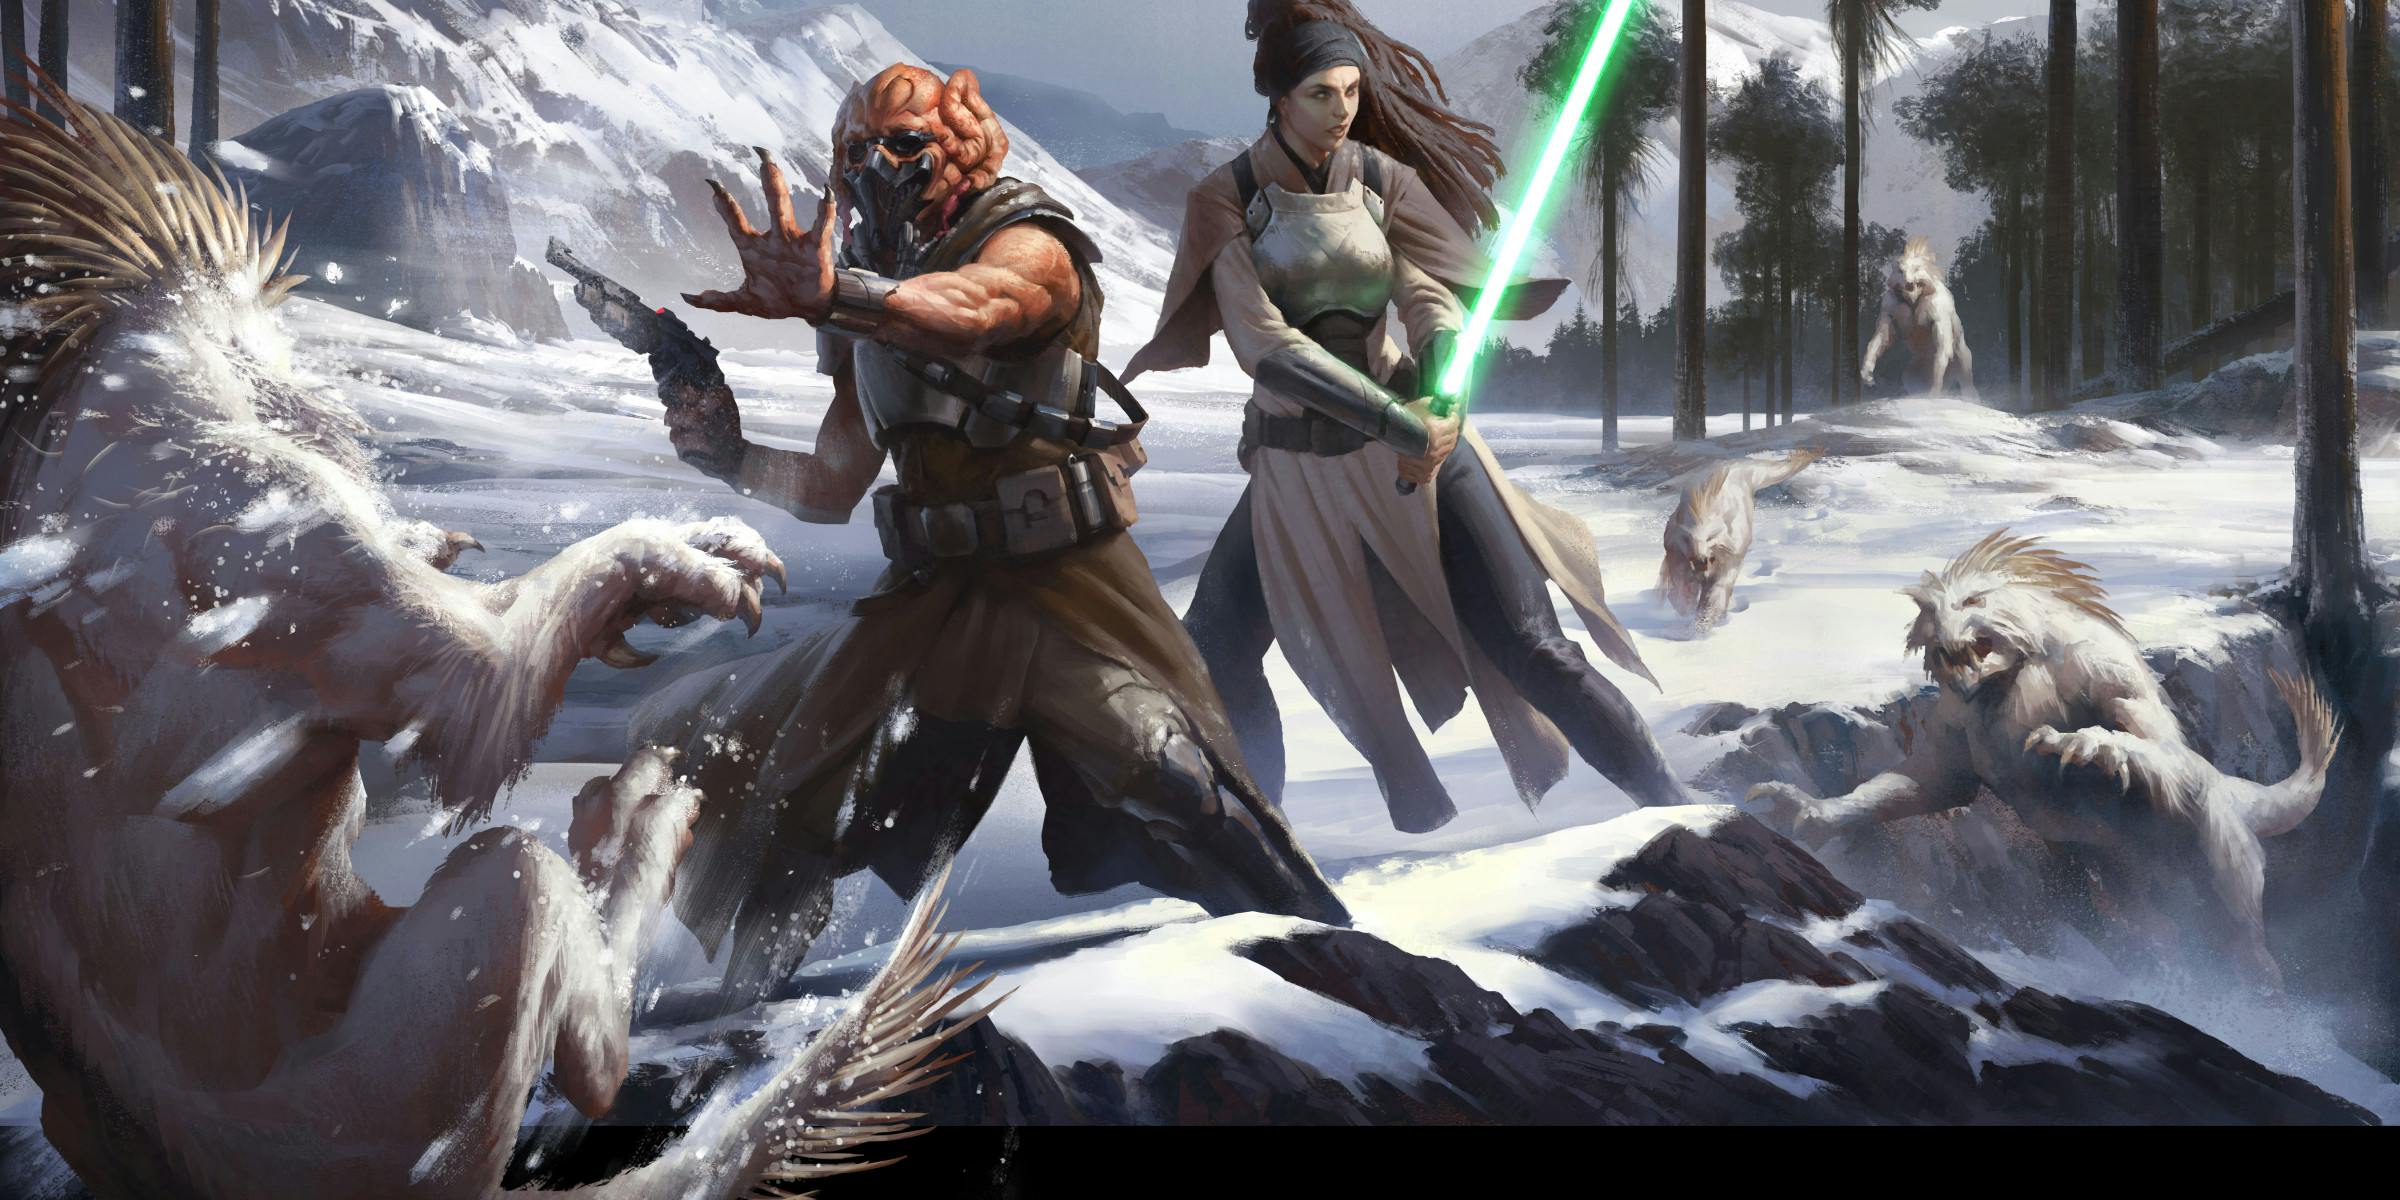 Learn to Play Star Wars RPG by Fantasy Flight Games